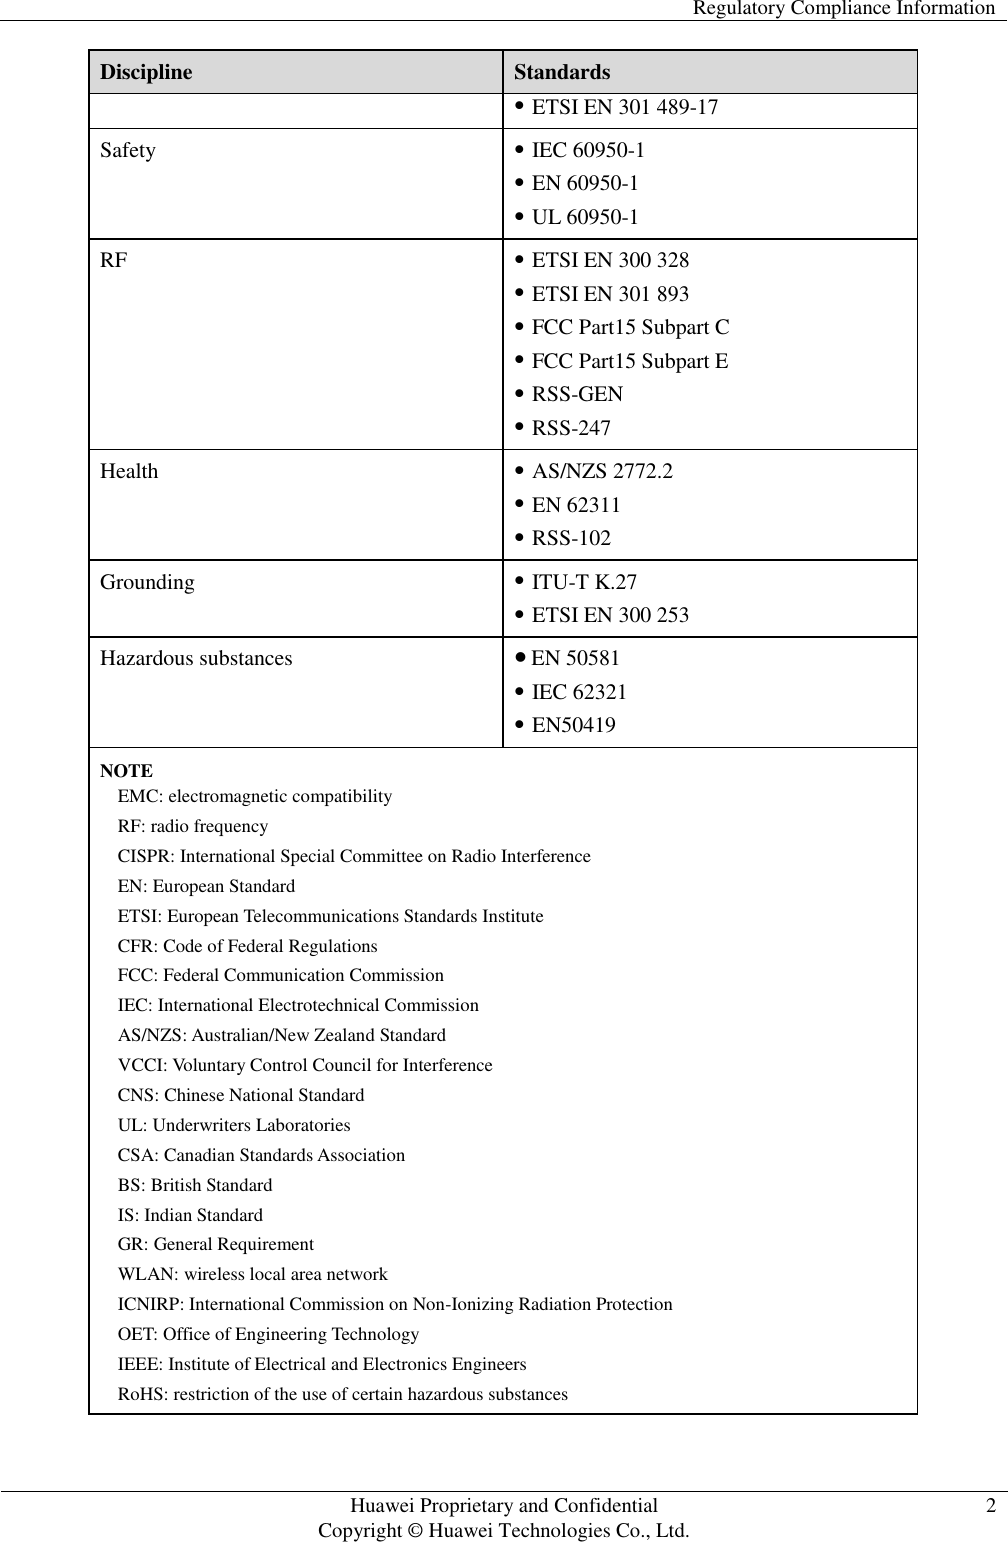   Regulatory Compliance Information   Huawei Proprietary and Confidential                                     Copyright © Huawei Technologies Co., Ltd. 2  Discipline Standards  ETSI EN 301 489-17 Safety  IEC 60950-1  EN 60950-1  UL 60950-1 RF  ETSI EN 300 328    ETSI EN 301 893  FCC Part15 Subpart C  FCC Part15 Subpart E  RSS-GEN  RSS-247 Health  AS/NZS 2772.2  EN 62311  RSS-102 Grounding  ITU-T K.27  ETSI EN 300 253 Hazardous substances  EN 50581  IEC 62321  EN50419 NOTE EMC: electromagnetic compatibility RF: radio frequency CISPR: International Special Committee on Radio Interference EN: European Standard ETSI: European Telecommunications Standards Institute CFR: Code of Federal Regulations FCC: Federal Communication Commission IEC: International Electrotechnical Commission AS/NZS: Australian/New Zealand Standard VCCI: Voluntary Control Council for Interference CNS: Chinese National Standard UL: Underwriters Laboratories CSA: Canadian Standards Association BS: British Standard IS: Indian Standard GR: General Requirement WLAN: wireless local area network ICNIRP: International Commission on Non-Ionizing Radiation Protection OET: Office of Engineering Technology IEEE: Institute of Electrical and Electronics Engineers RoHS: restriction of the use of certain hazardous substances 